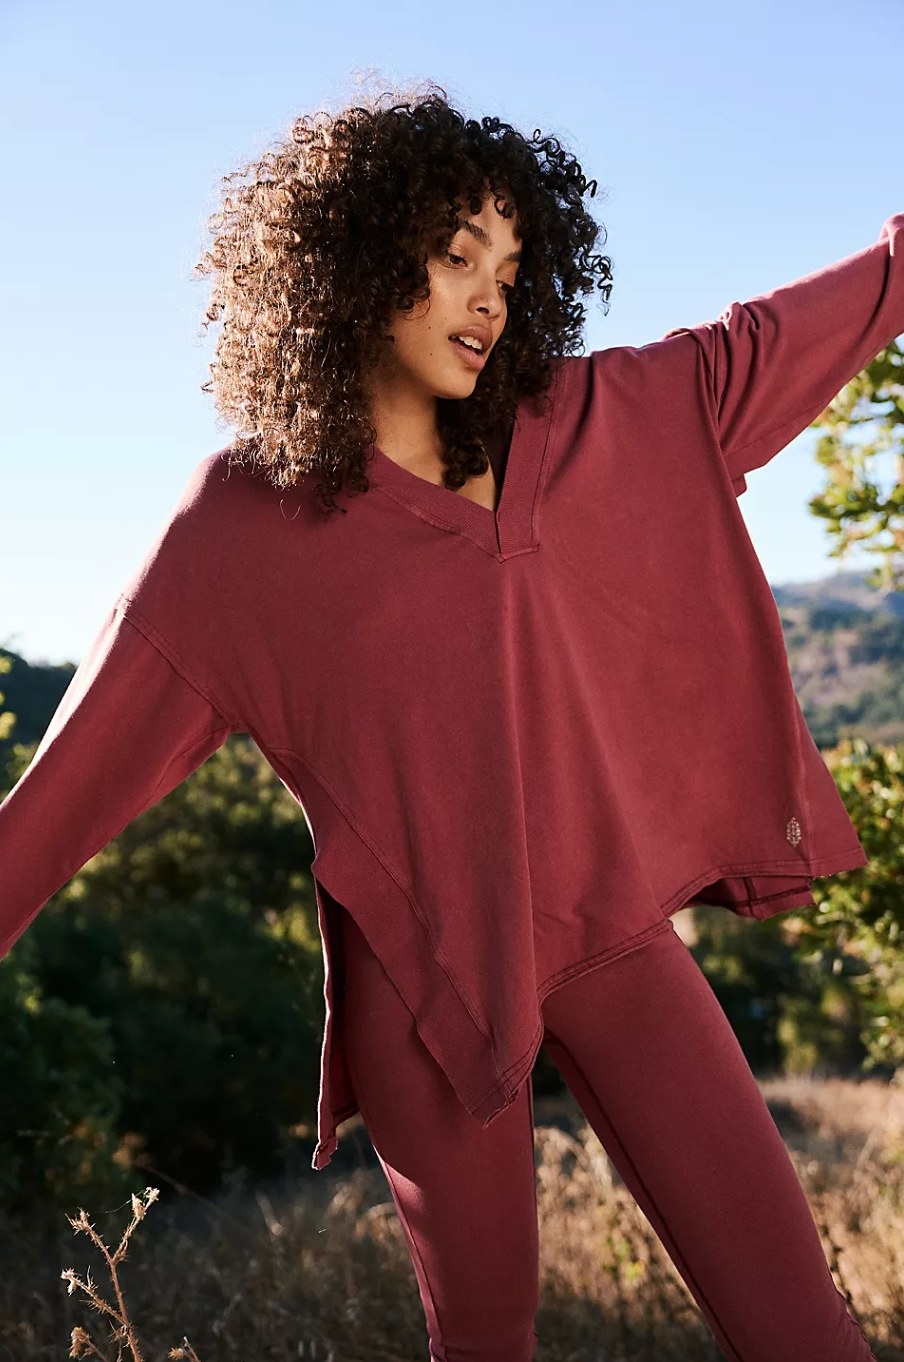 a model outdoors wearing the dark red long sleeved top and pants set